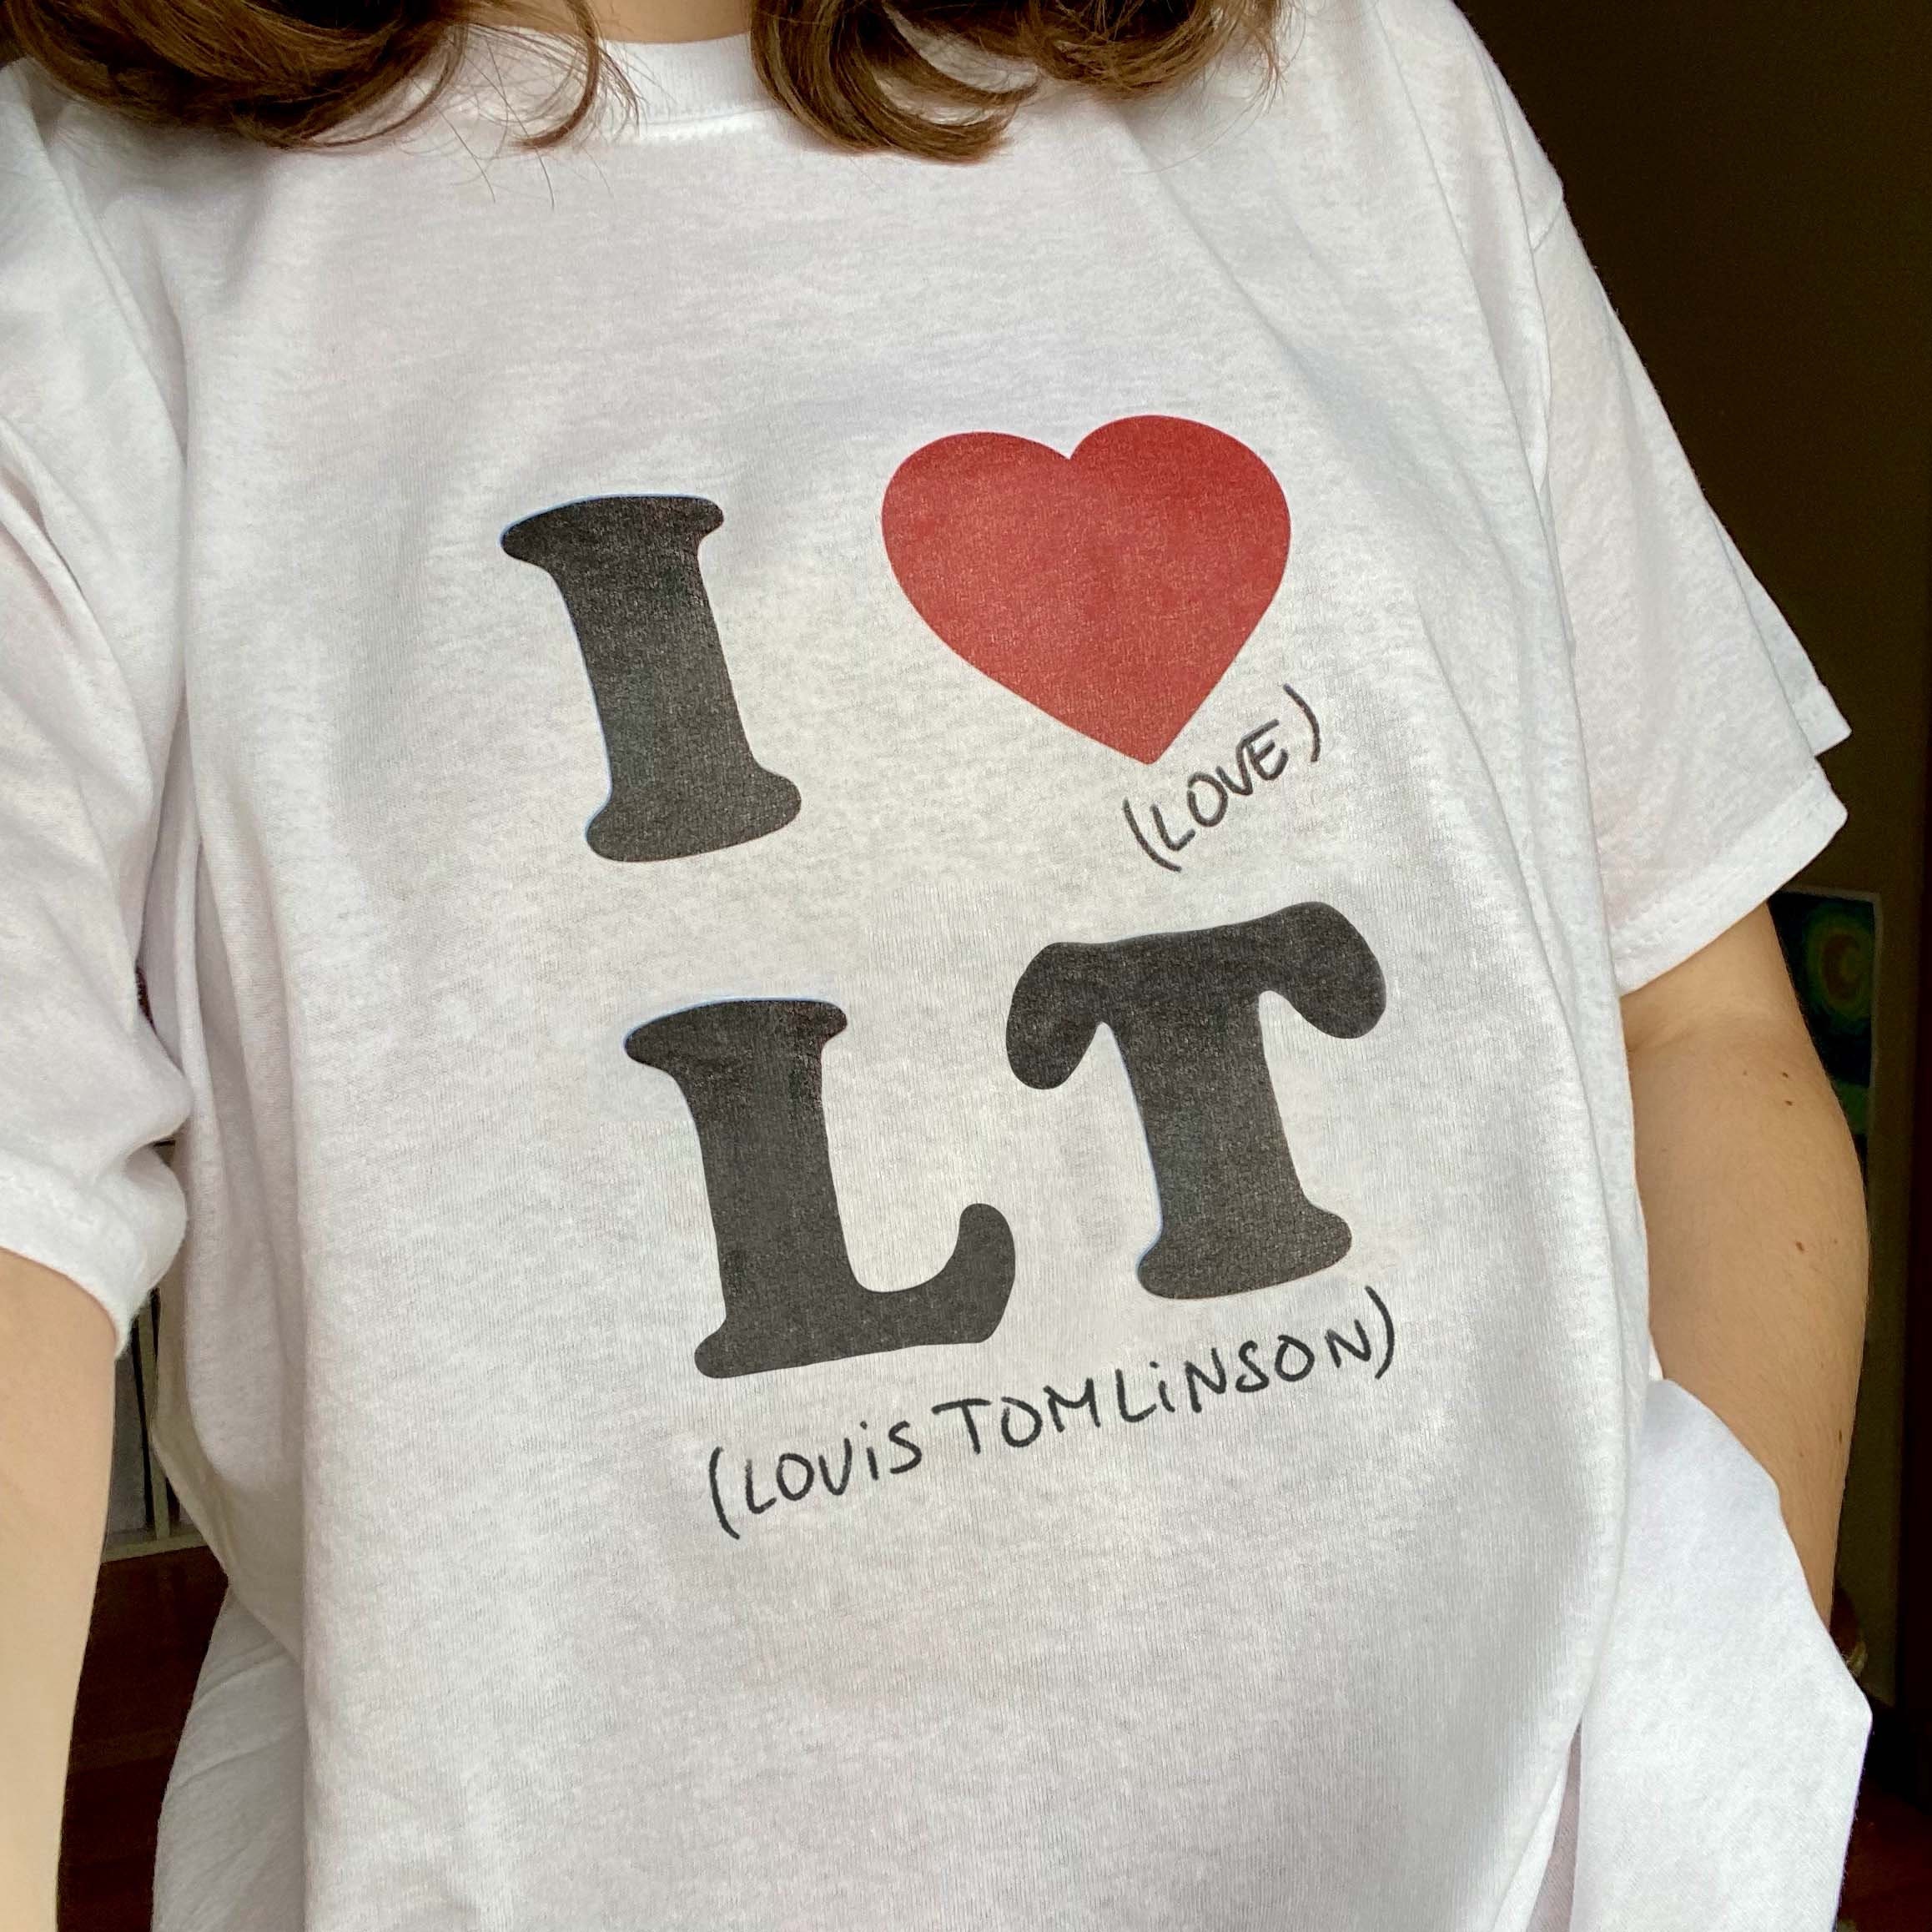 Discover I love louis tomlinson shirt